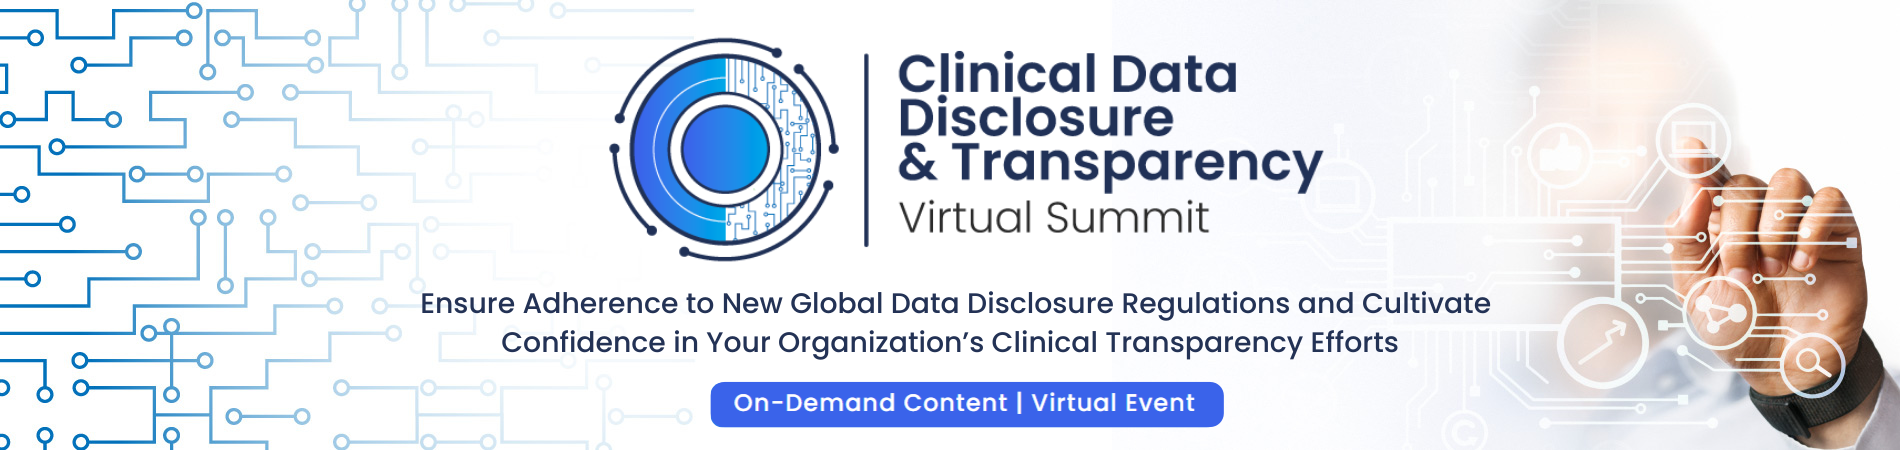 Banner of Clinical Data Disclosure & Transparency Virtual Summit, February 15-16, 2023